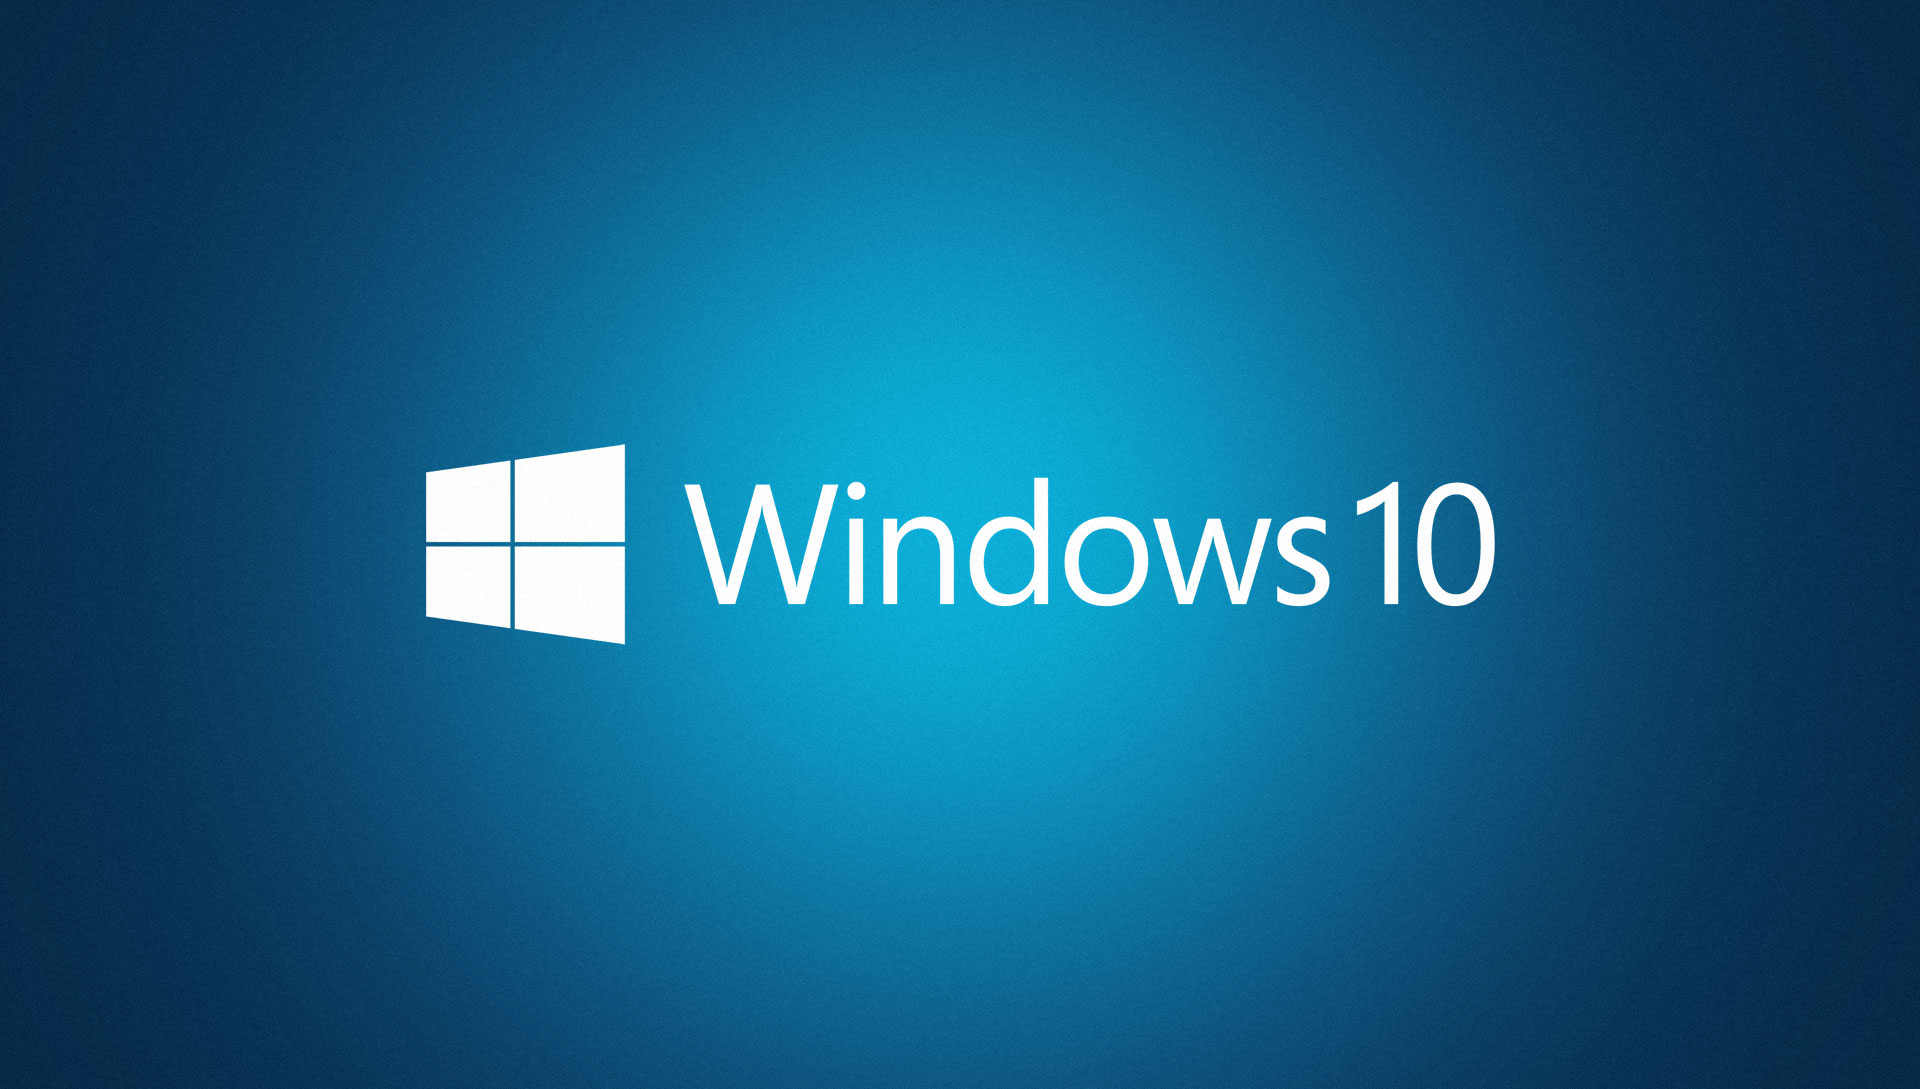 Watch the Windows 10 media briefing live webcast on Wednesday   The 1920x1089